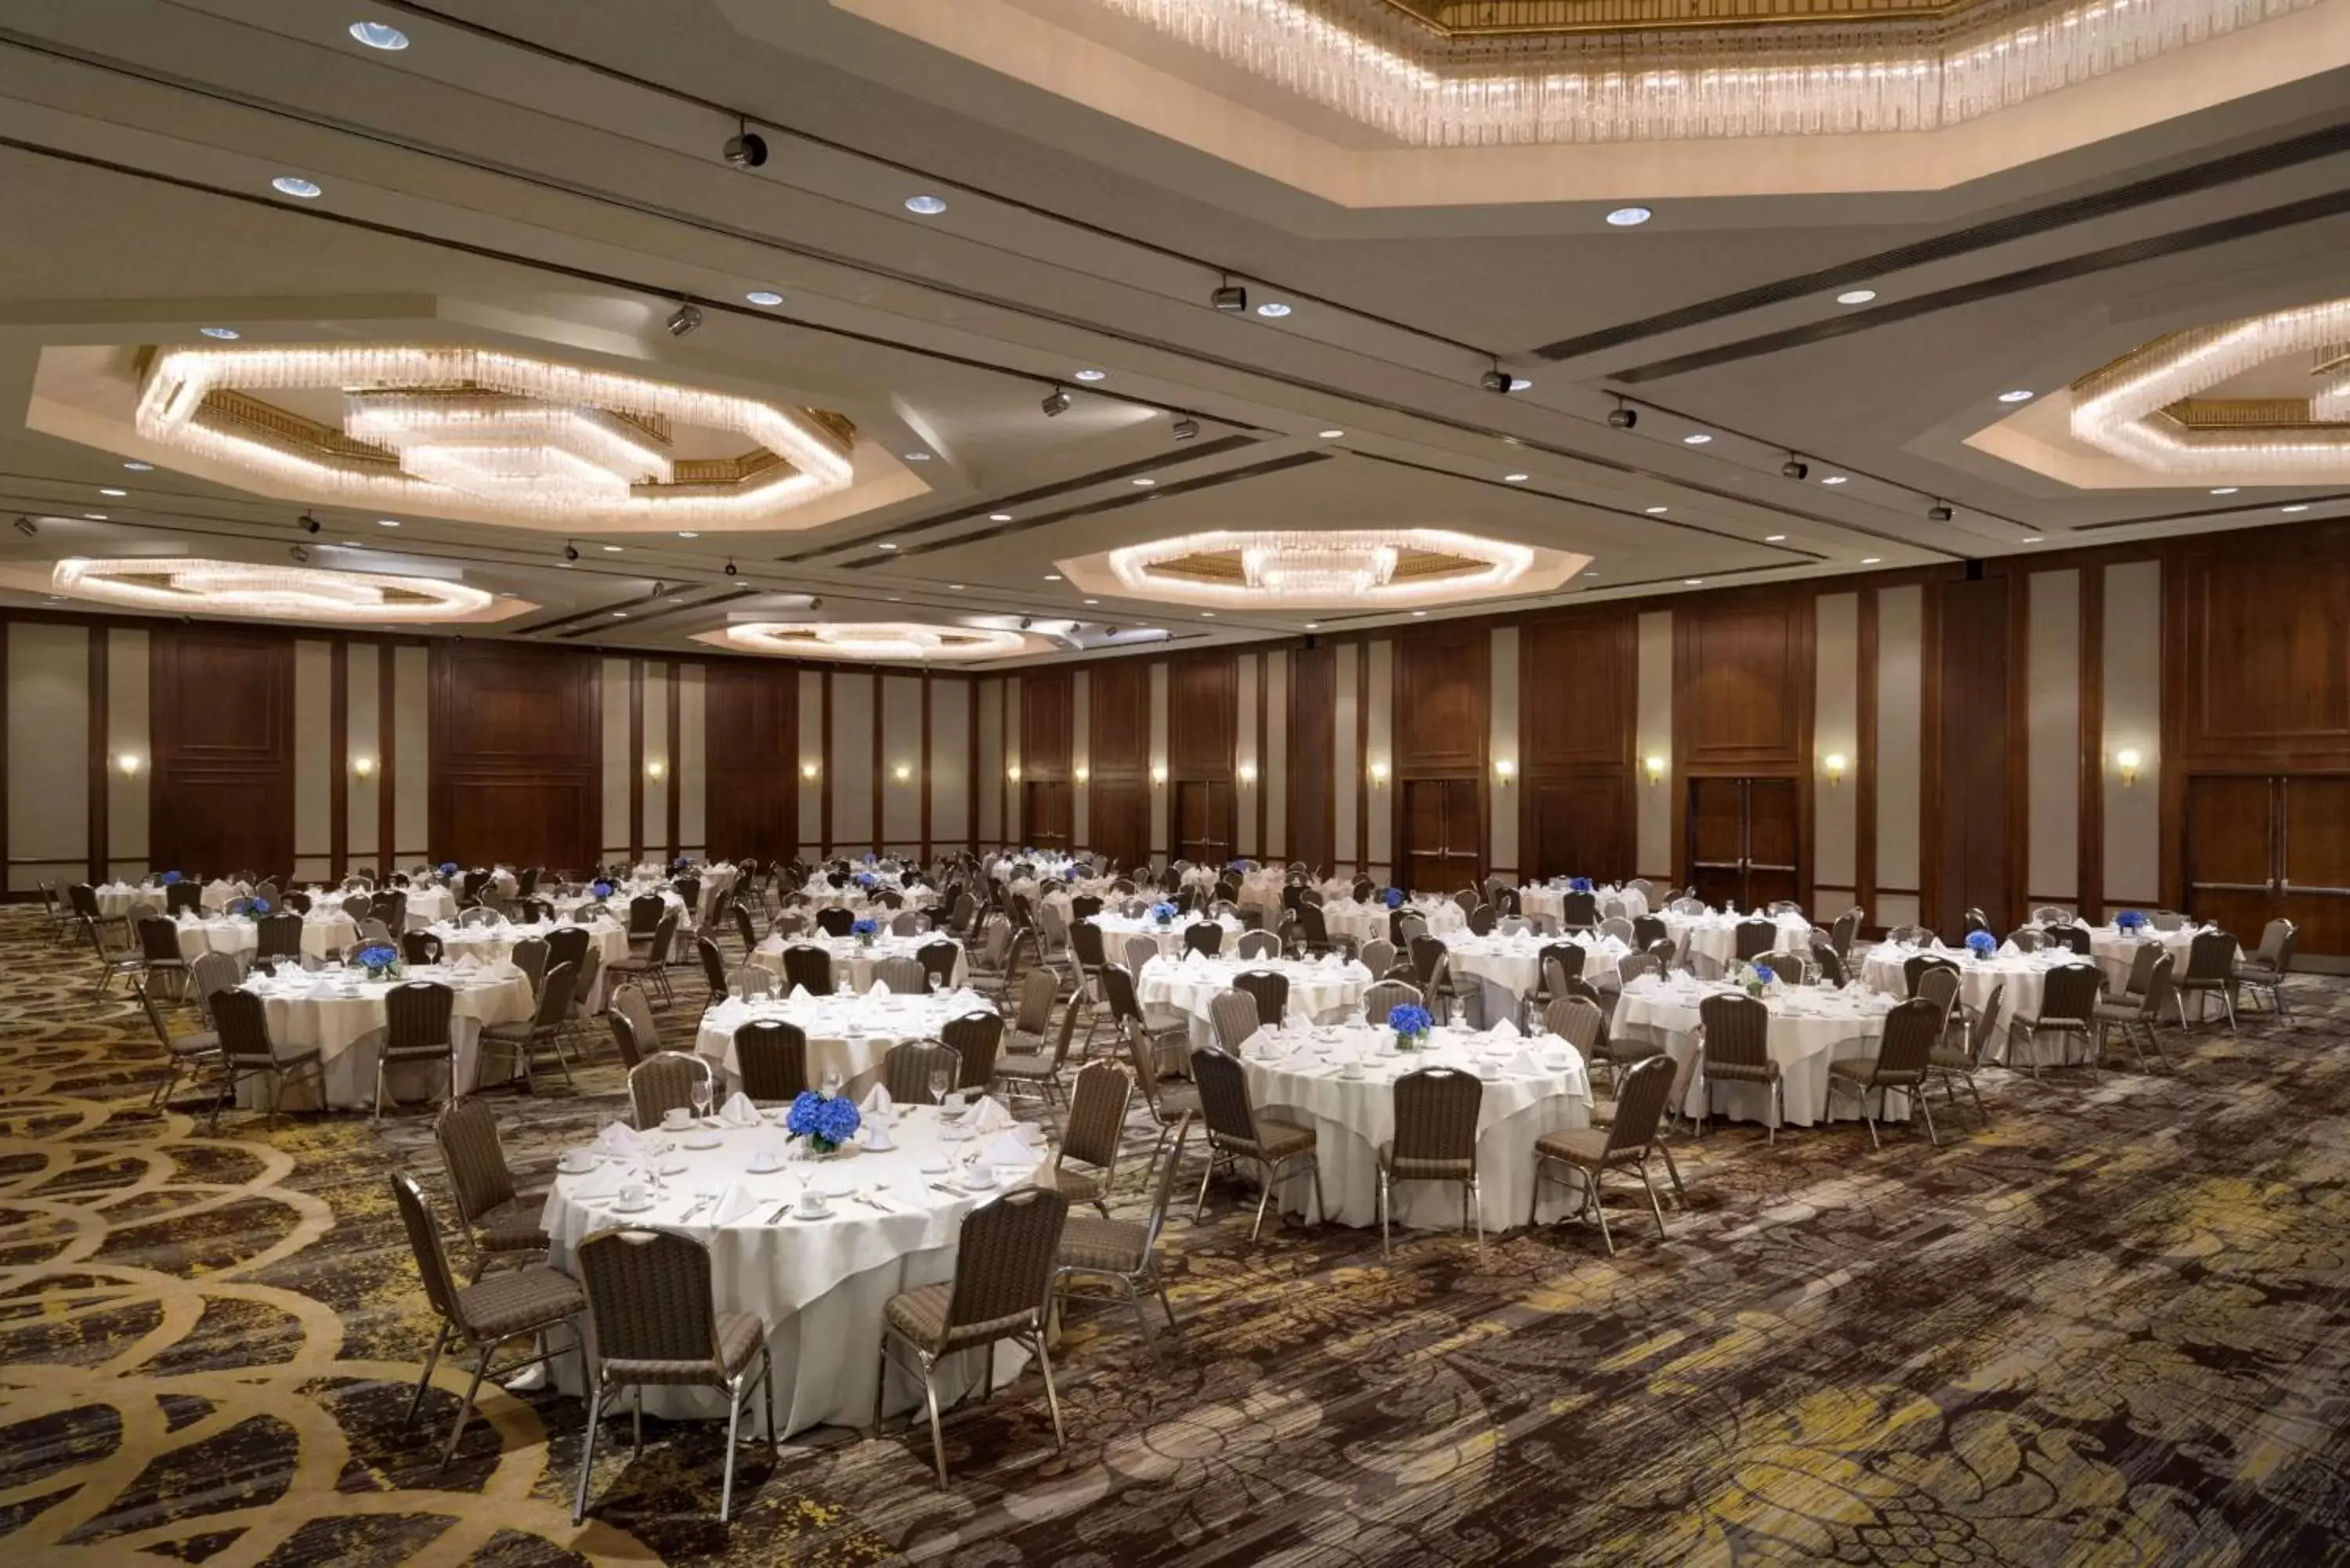 Meeting/conference room, Banquet Facilities in Hilton Stamford Hotel & Executive Meeting Center